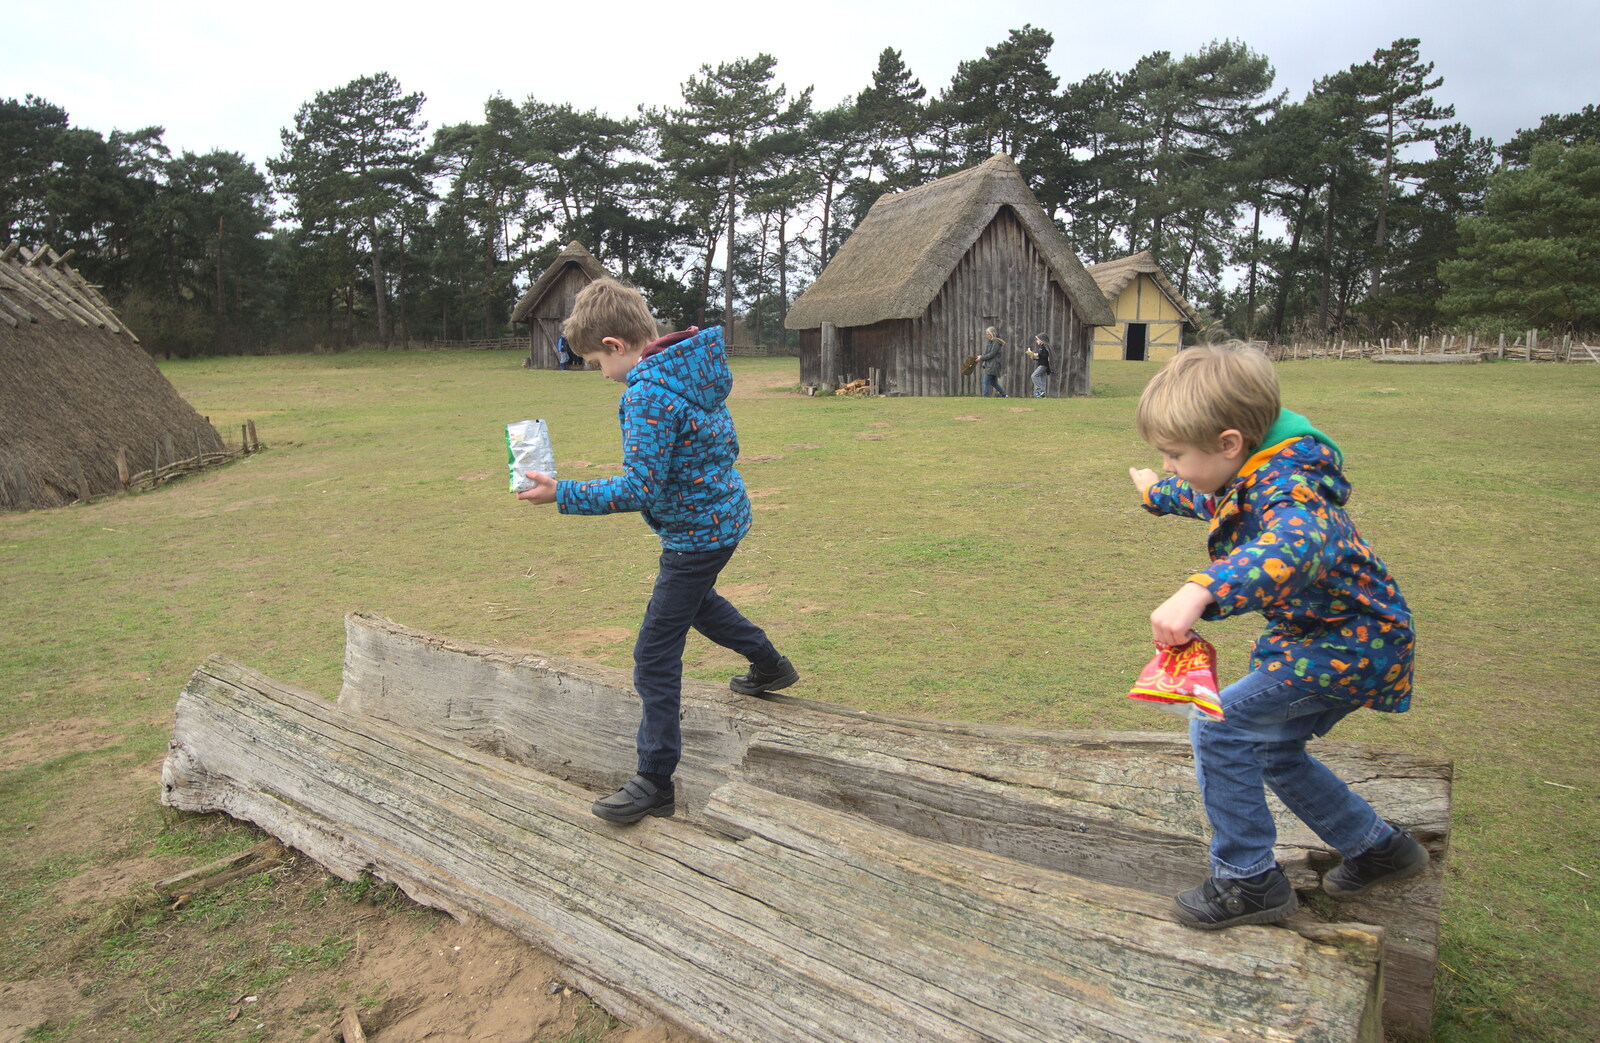 Fred and Harry on a log from An Anglo-Saxon Village, West Stow, Suffolk - 19th February 2017